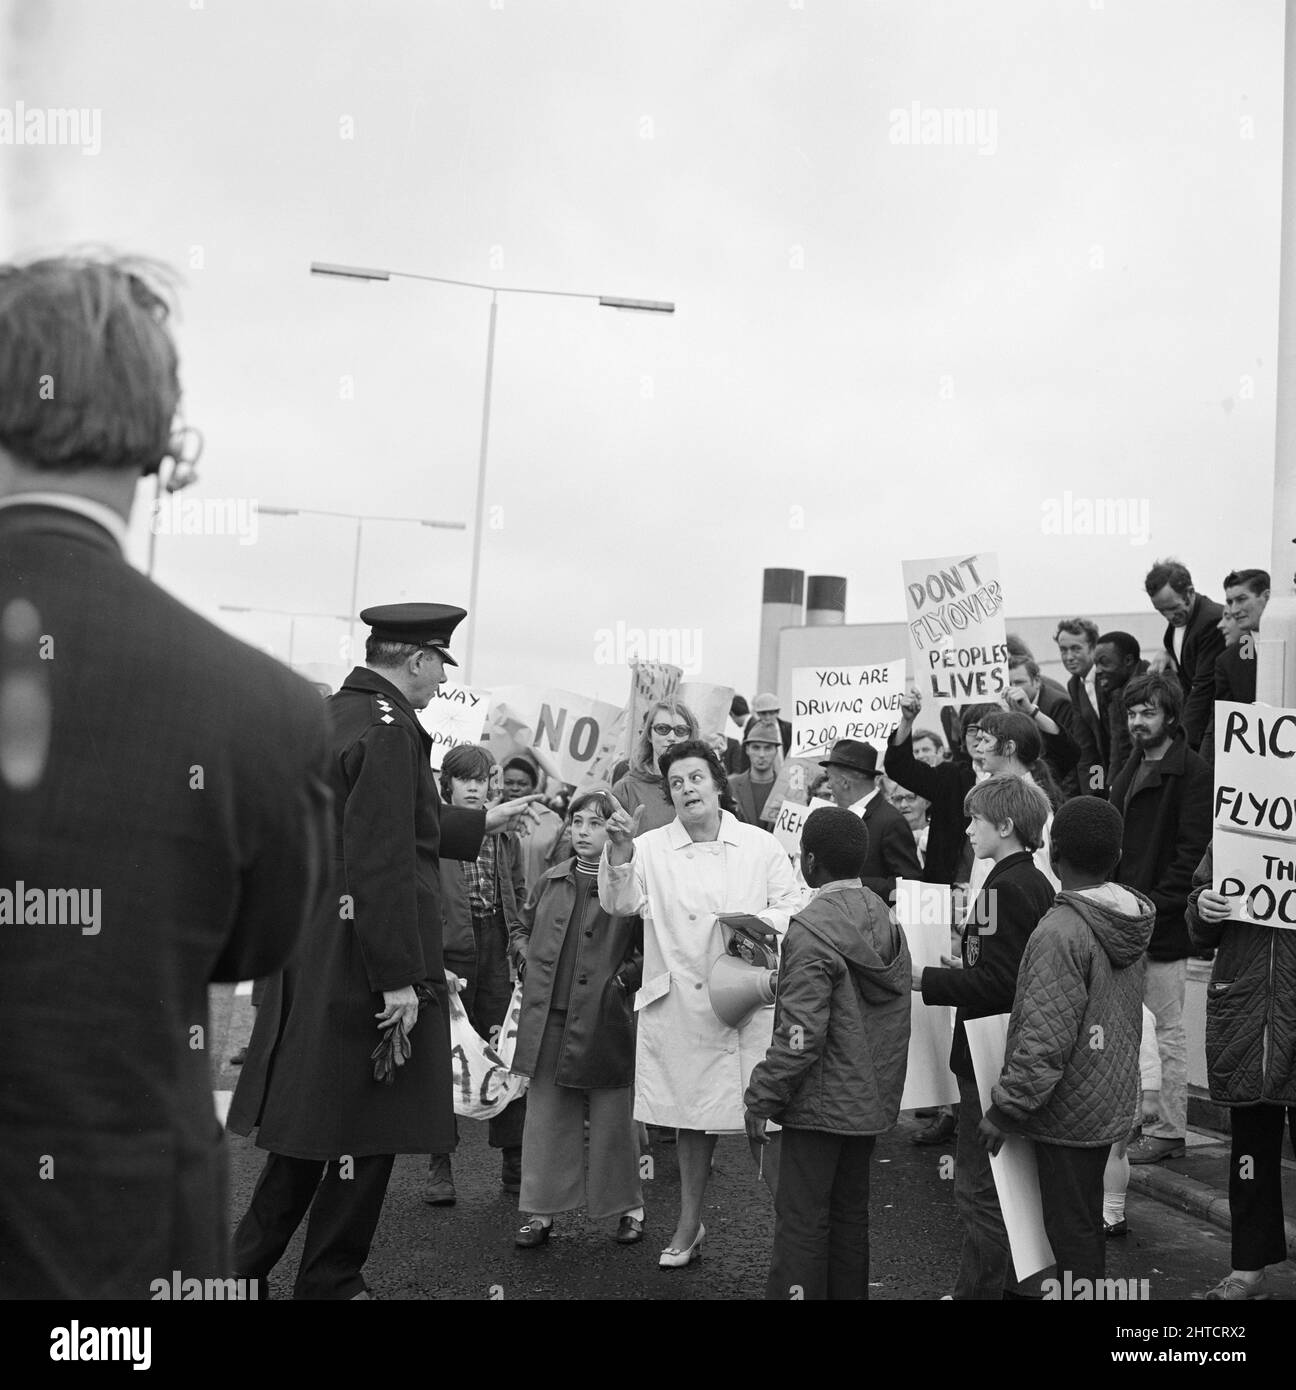 Westway Flyover, A40, Paddington, City of Westminster, London, 28/07/1970. A woman confronting a police officer during a demonstration against the opening of the Westway Flyover. Acklam Road was the focus of protests against the Westway by local residents. Houses along one side of the street had been demolished to make way for the flyover. At a reception held earlier that day at the Lord&#x2019;s Tavern, George Clark, leader of the residents&#x2019; social rights committee, had presented their objections to the Minister of Transport and representatives from the Greater London Council. By Septe Stock Photo